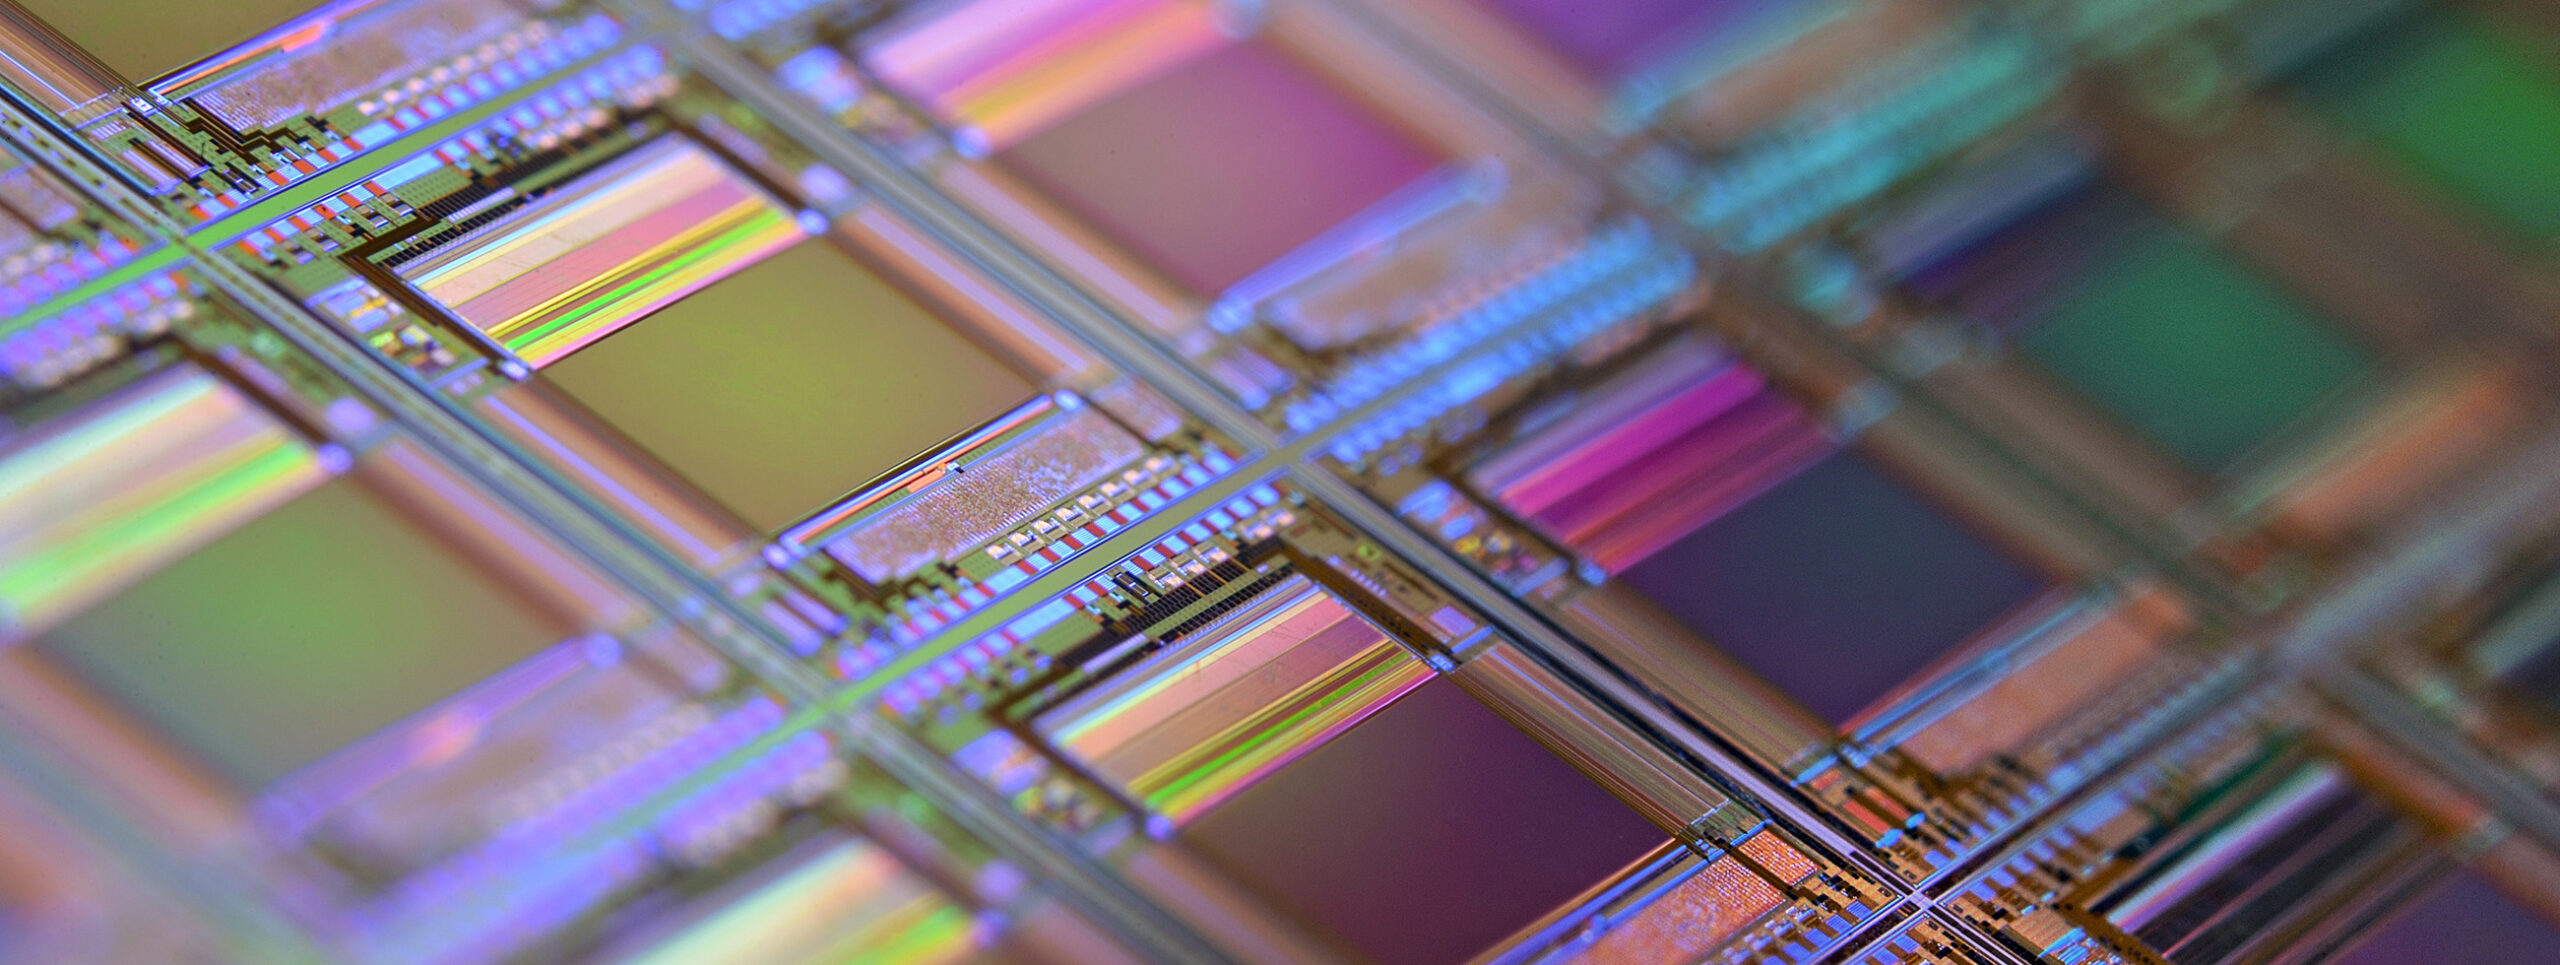 Photo of colorful semiconductors